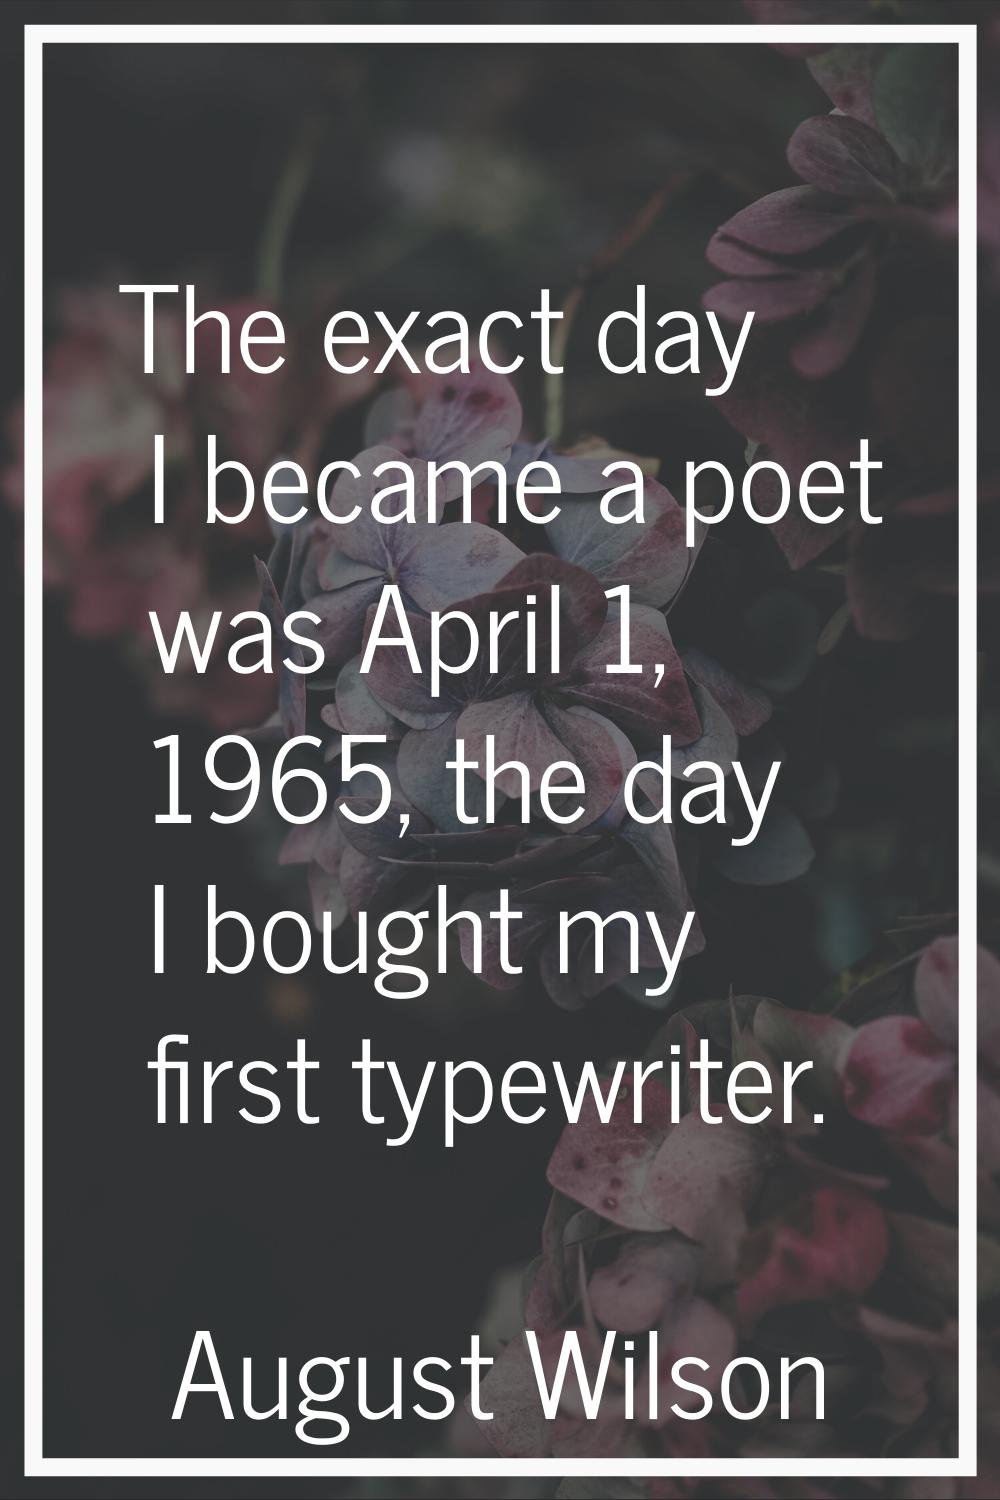 The exact day I became a poet was April 1, 1965, the day I bought my first typewriter.